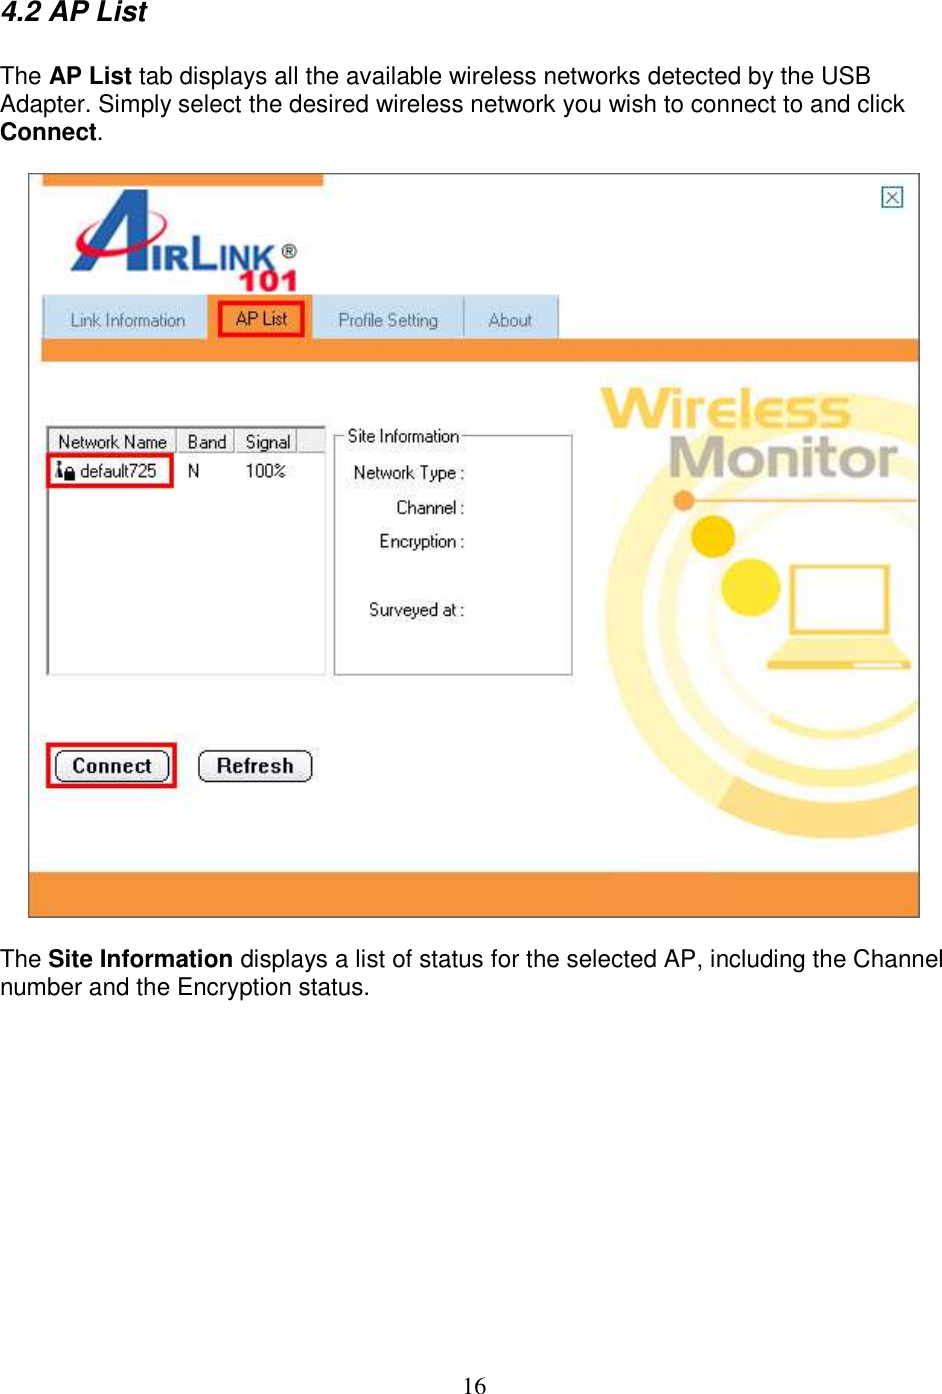 16 4.2 AP List  The AP List tab displays all the available wireless networks detected by the USB Adapter. Simply select the desired wireless network you wish to connect to and click Connect.    The Site Information displays a list of status for the selected AP, including the Channel number and the Encryption status.           